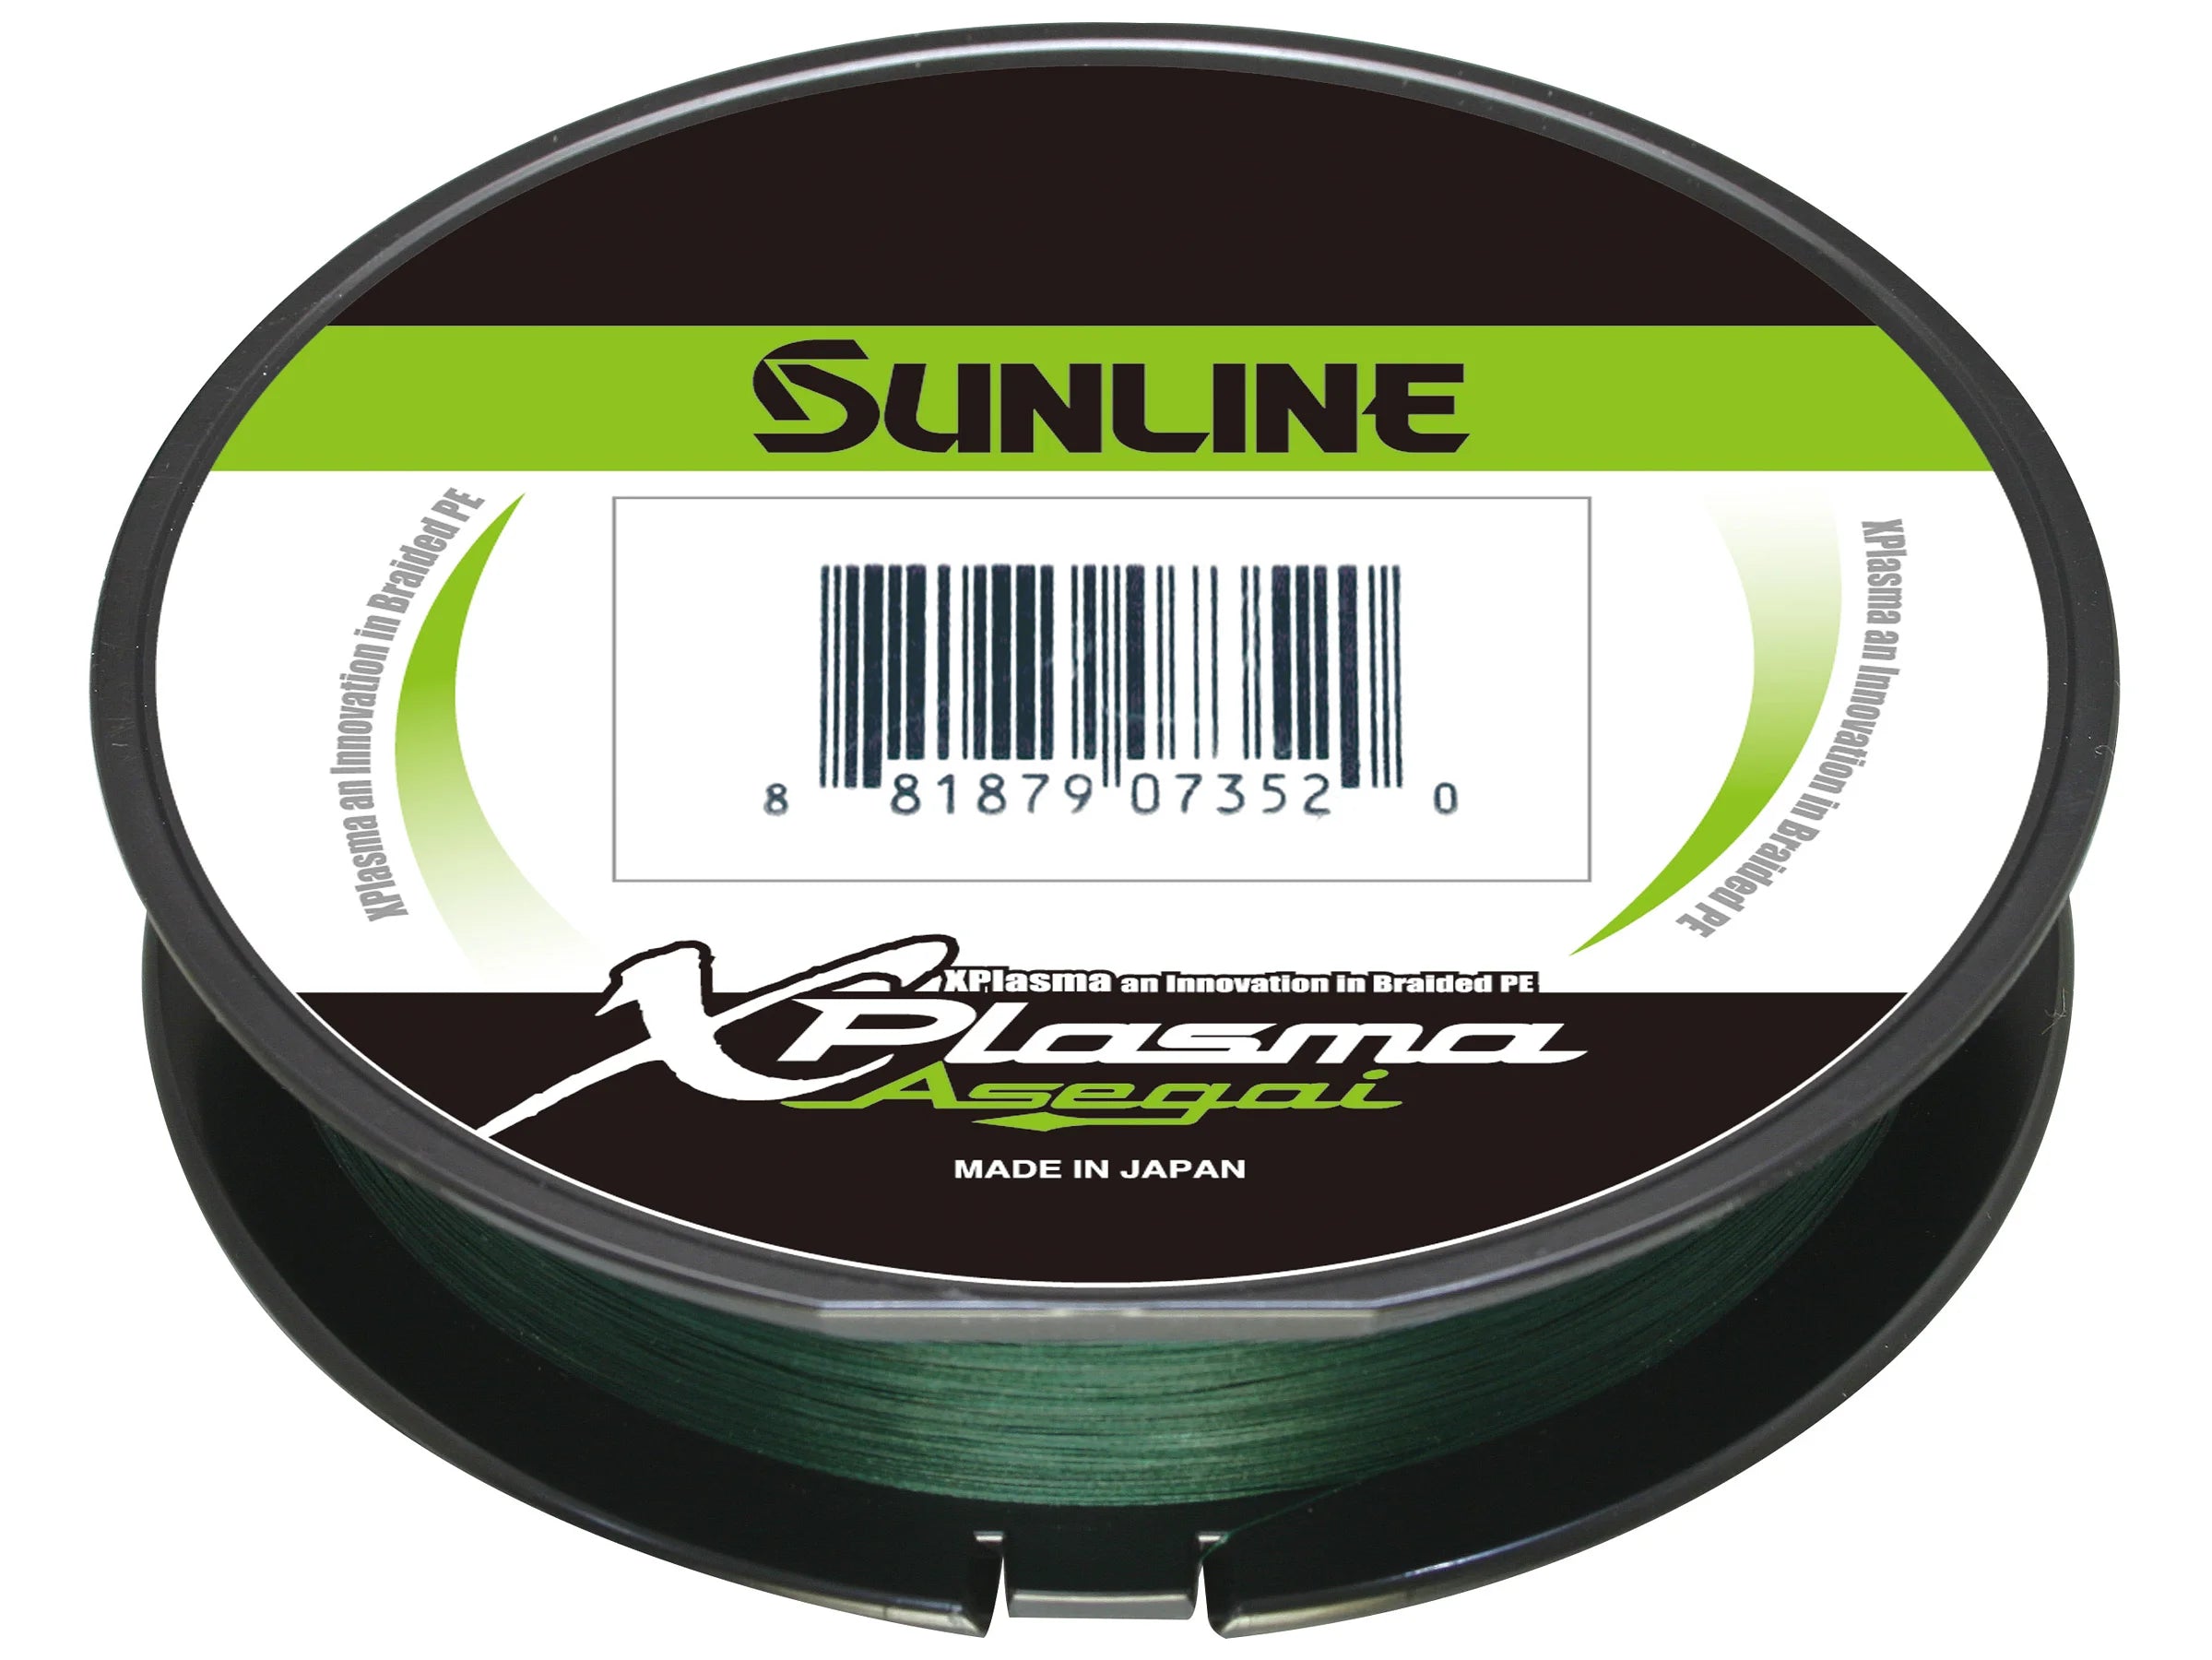  GPCPROLINE Braided Fishing Line PE 4 8 - Abrasion Resistant -  Fade Resistant - Cast Longer - Thinner & Smooth - Camo Blue, Camo Green,  Green - 10LB/15LB/20LB/30LB/50LB/80LB/100LB for Saltwater